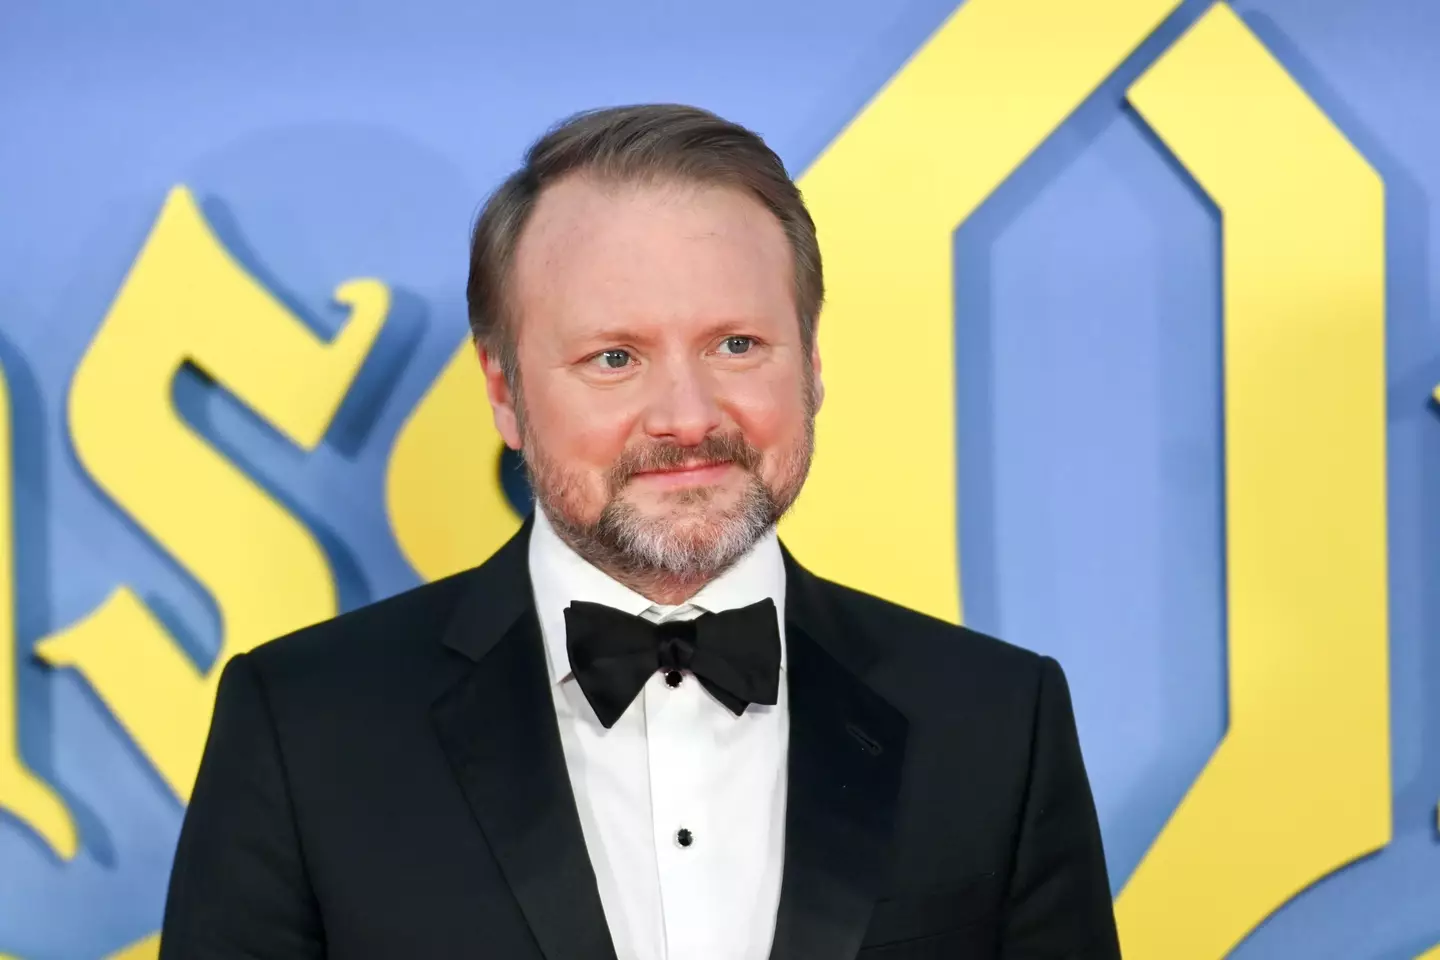 Rian Johnson insisted any direct parallels between Elon Musk and one of his characters was a 'horrible accident'.